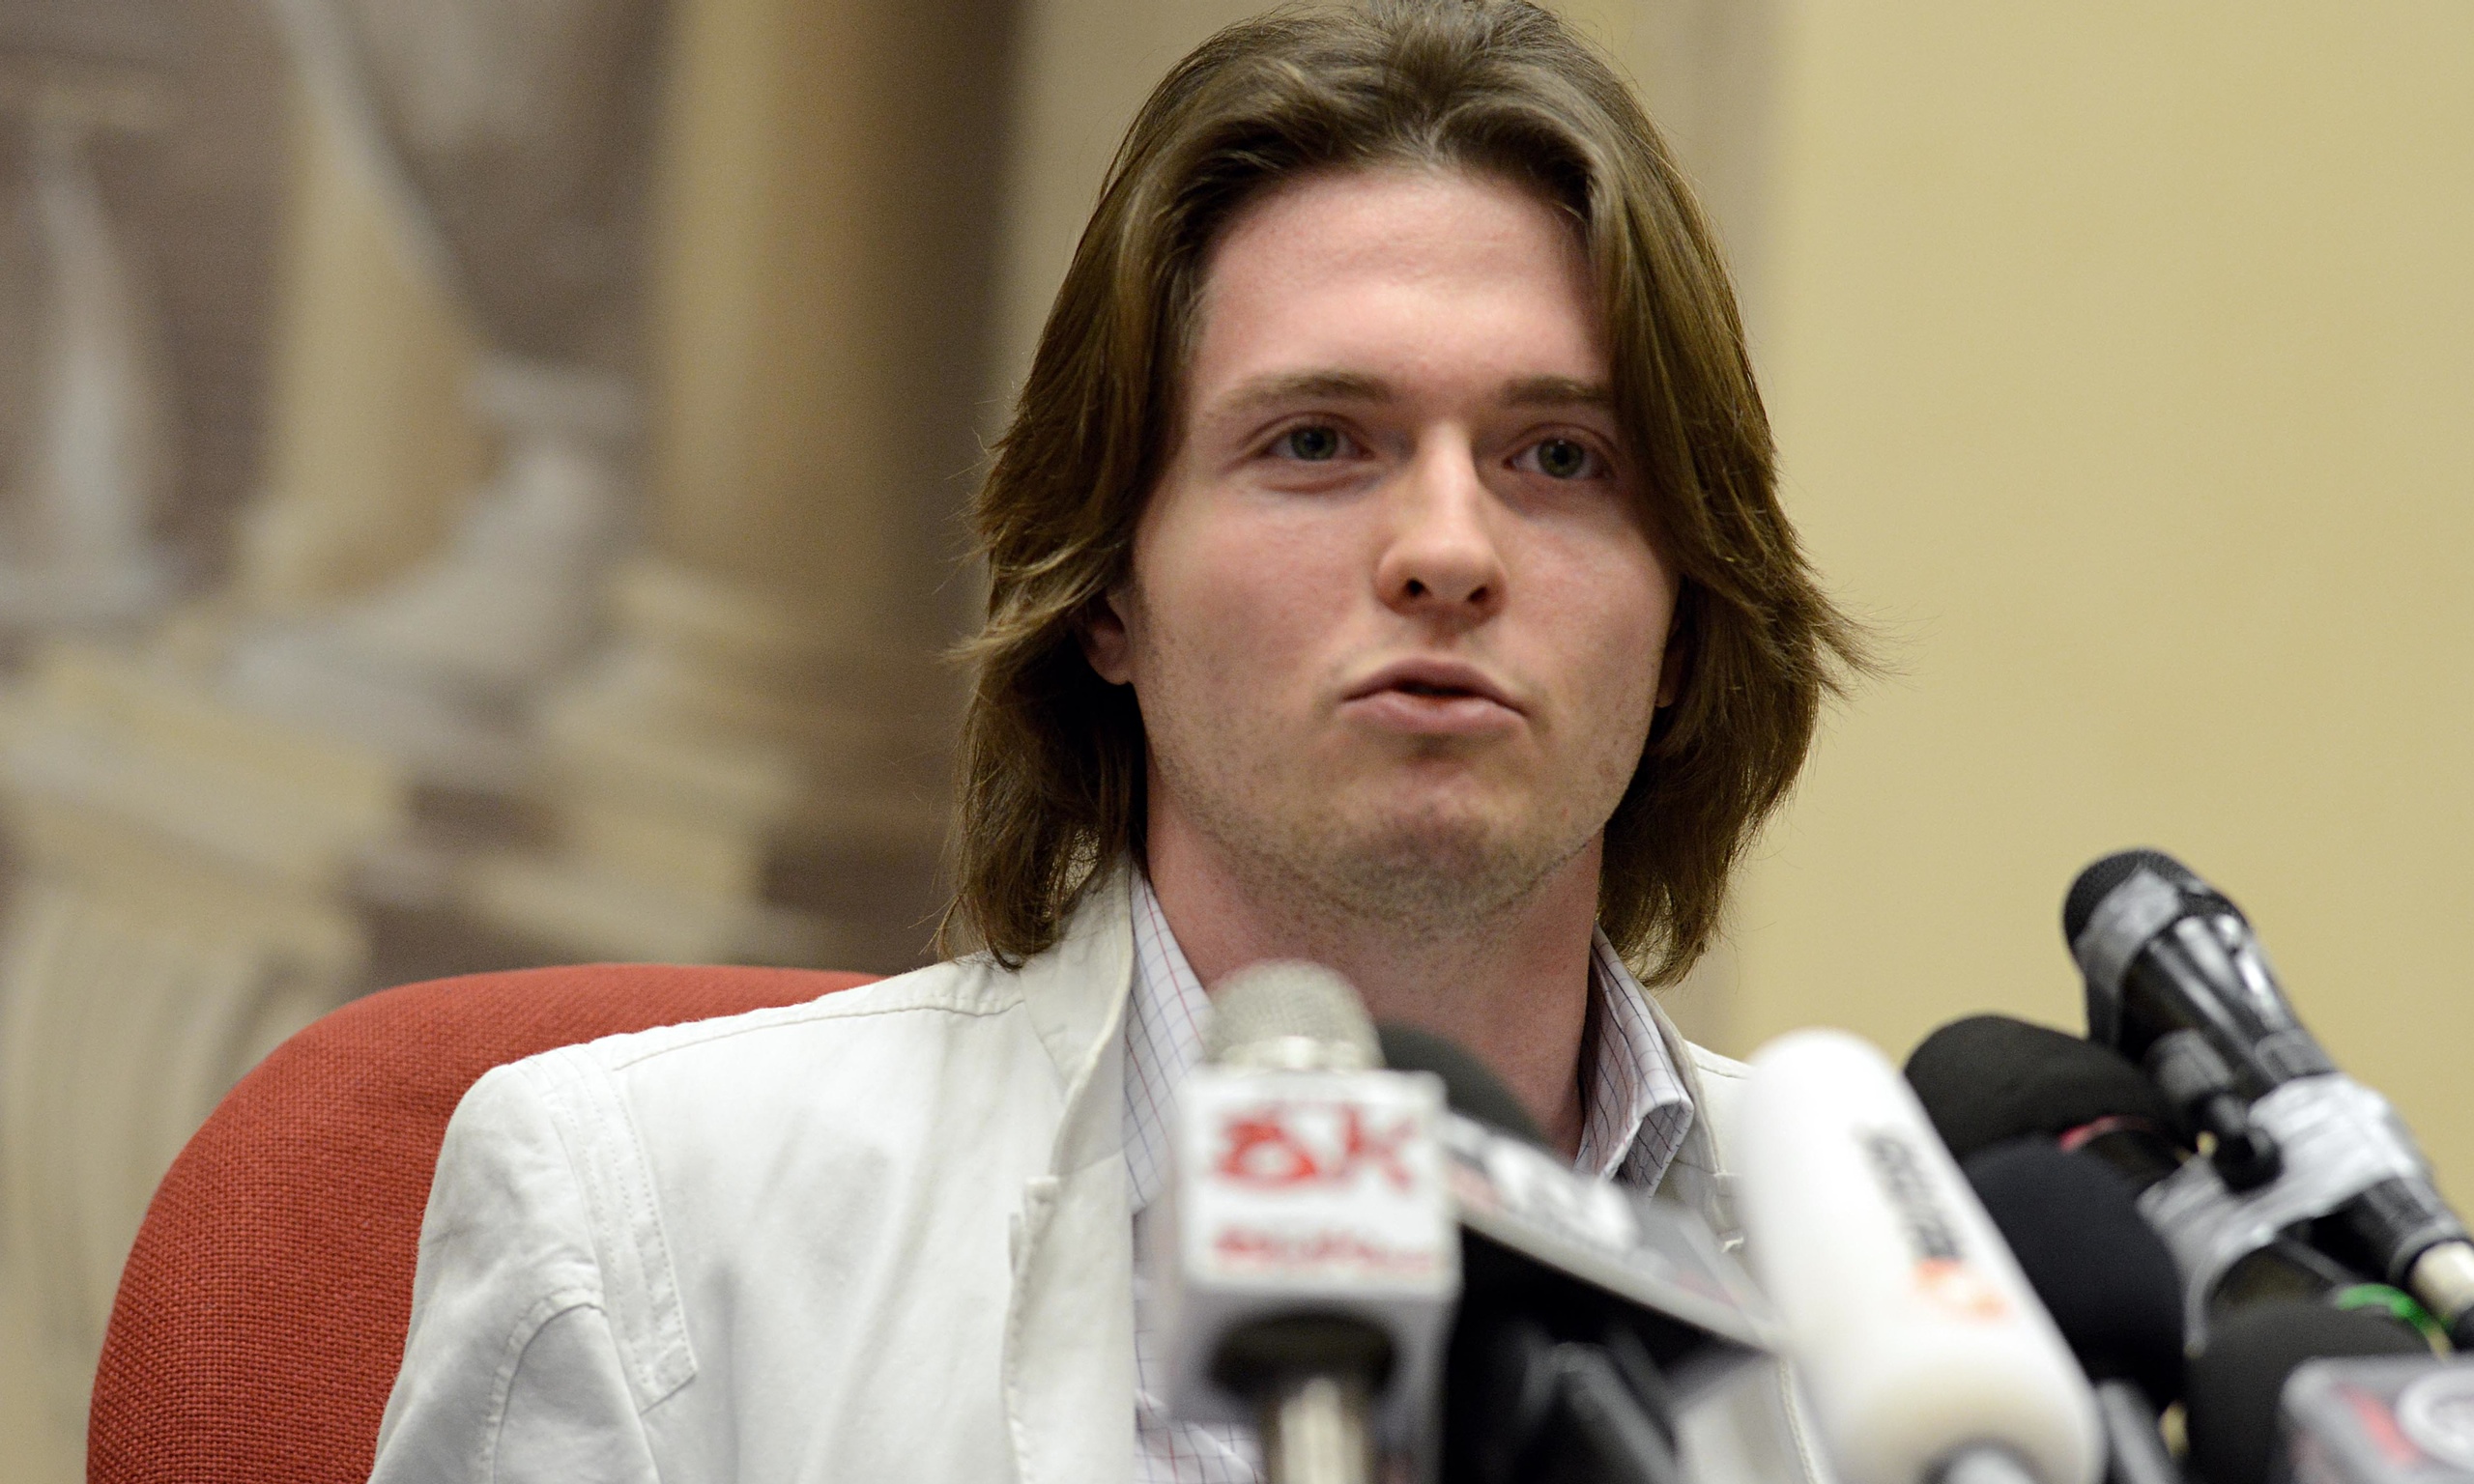 https://static-secure.guim.co.uk/sys-images/Guardian/About/General/2014/7/1/1404233391733/Raffaele-Sollecito-at-a-p-014.jpg